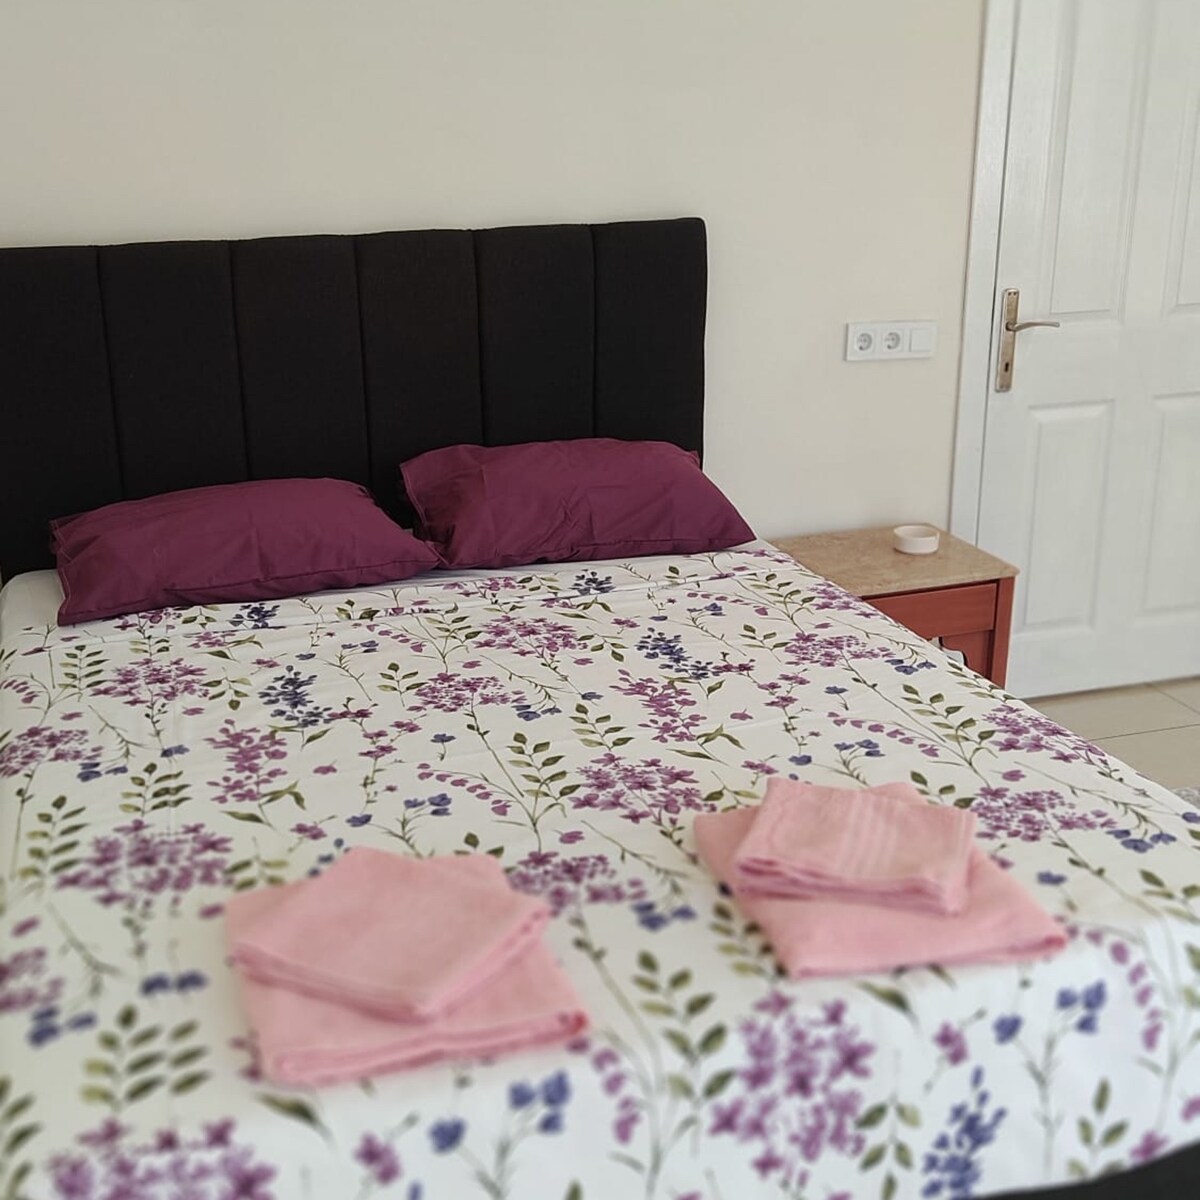 Lovely 1 bedroom apartment which sleeps 6